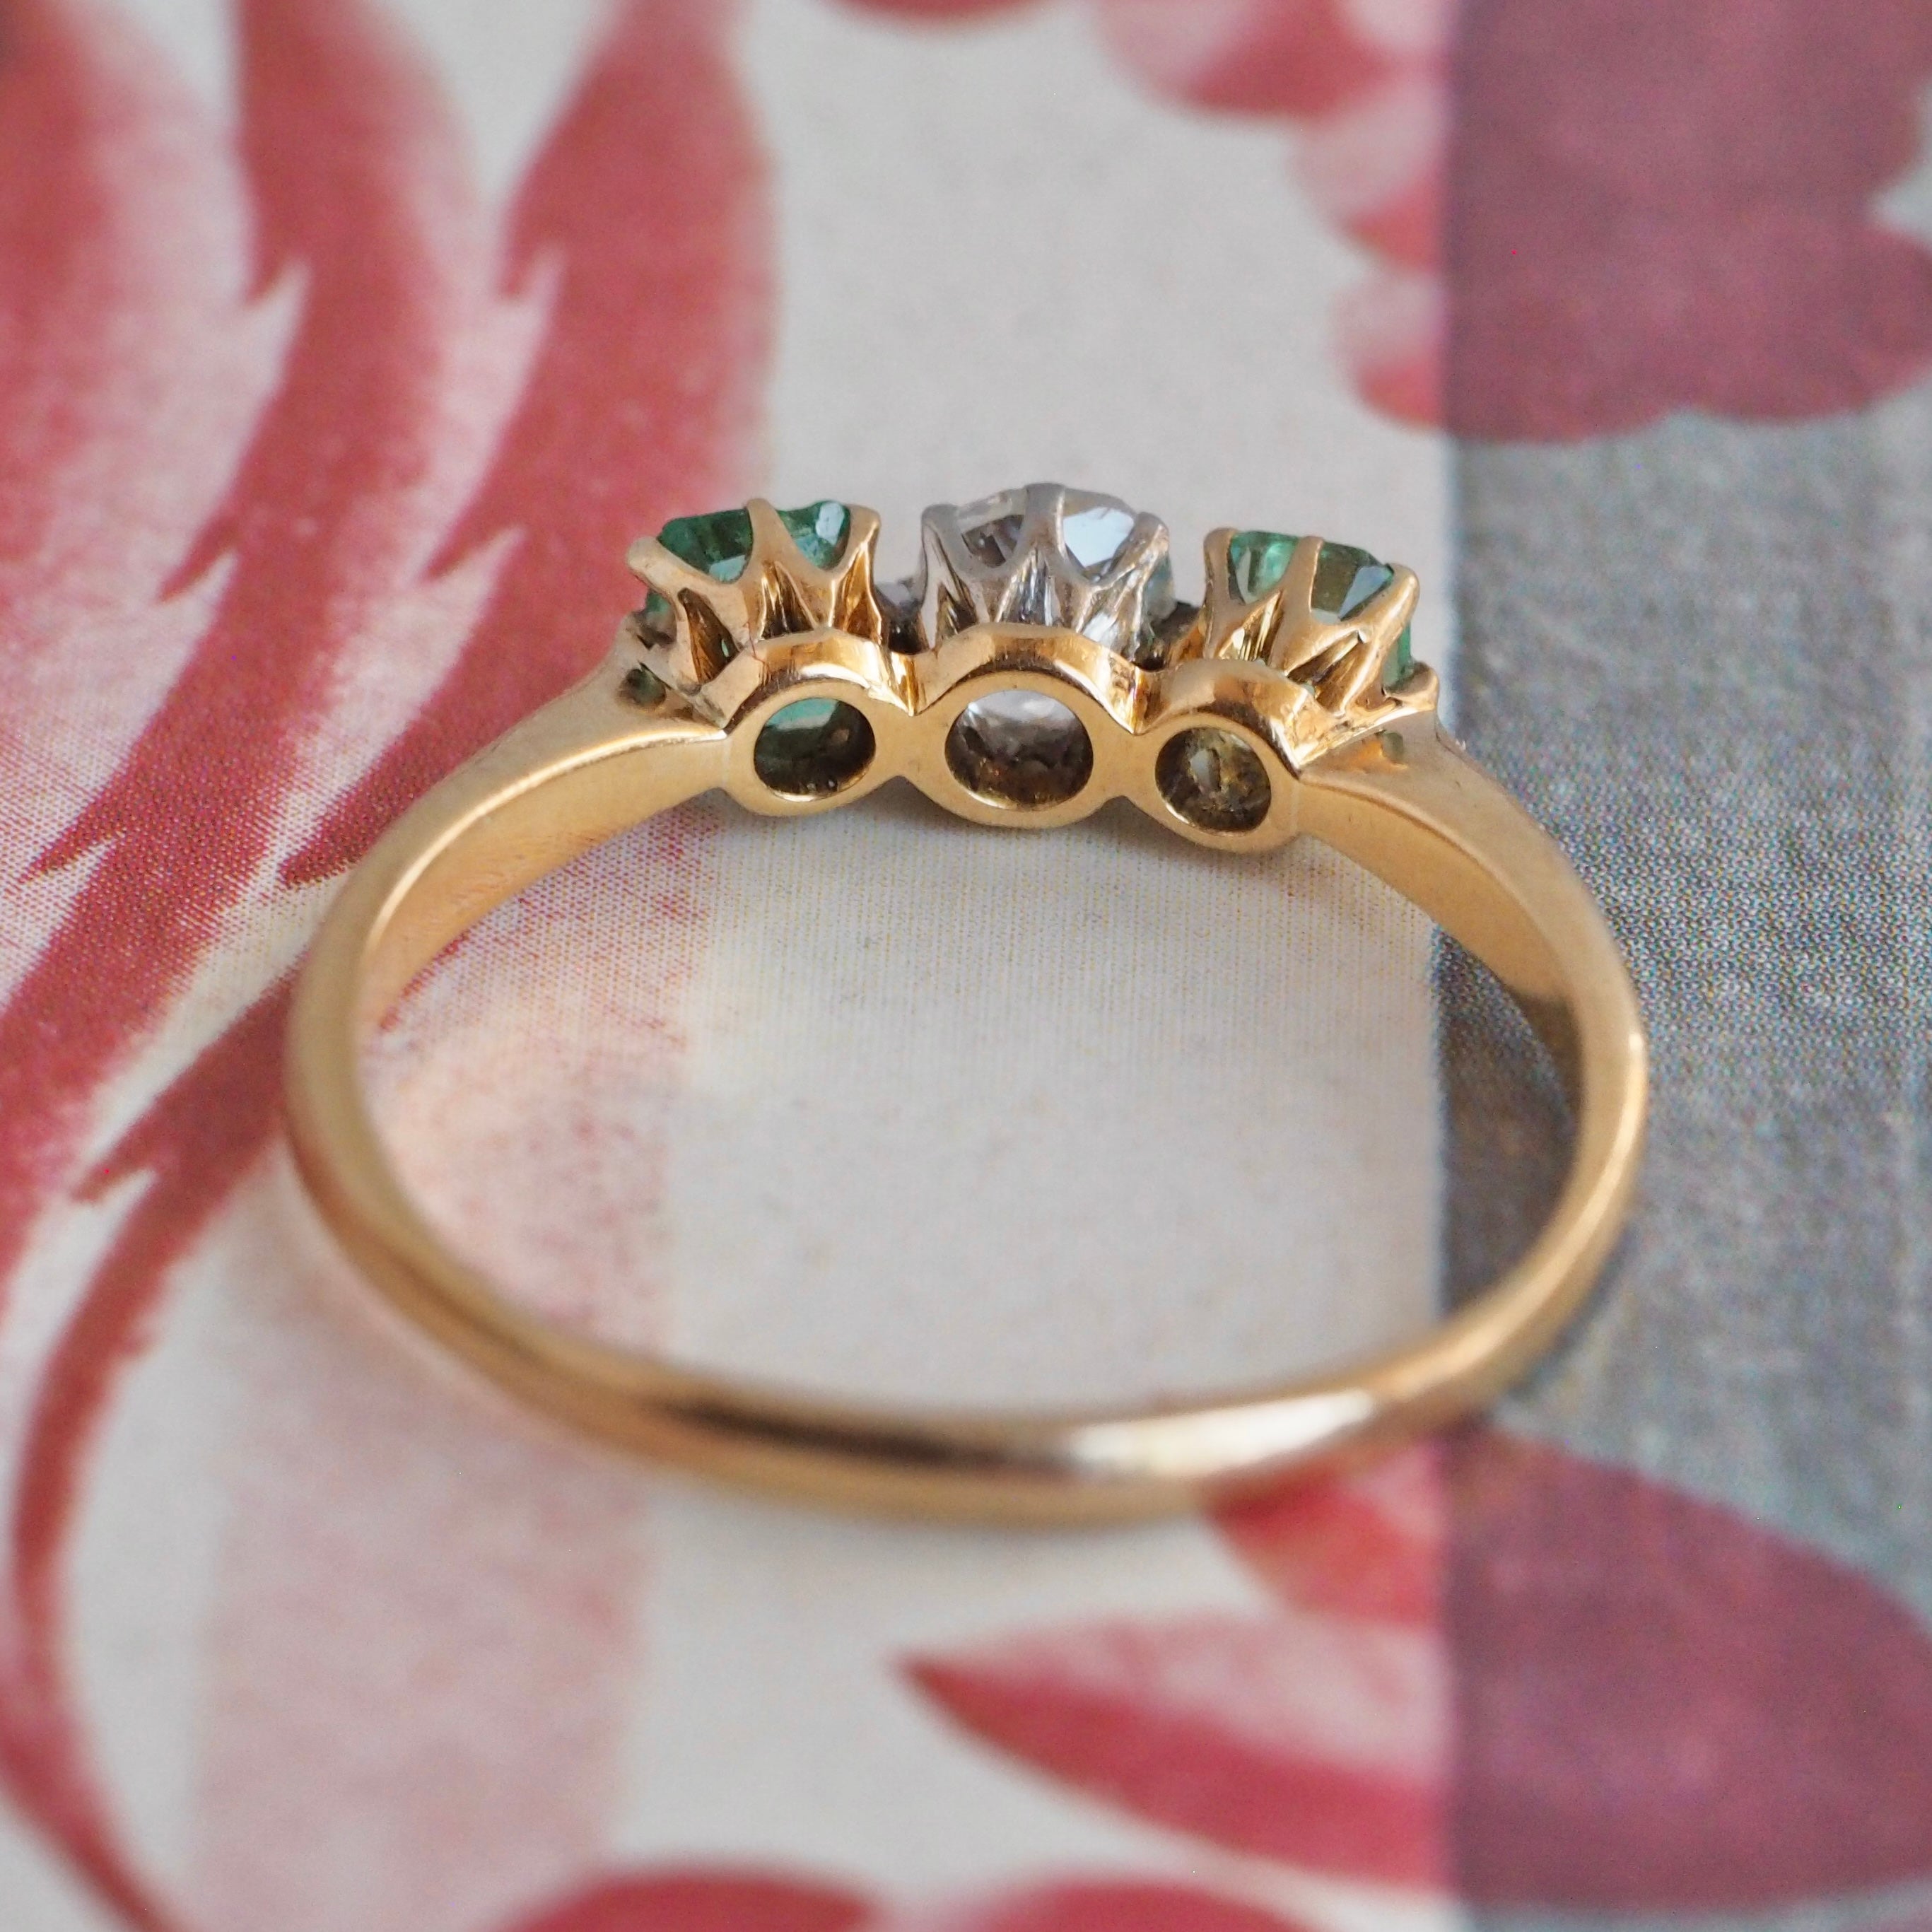 Antique Victorian 14k Gold Emerald and Old Mine Cut Diamond Trilogy Ring